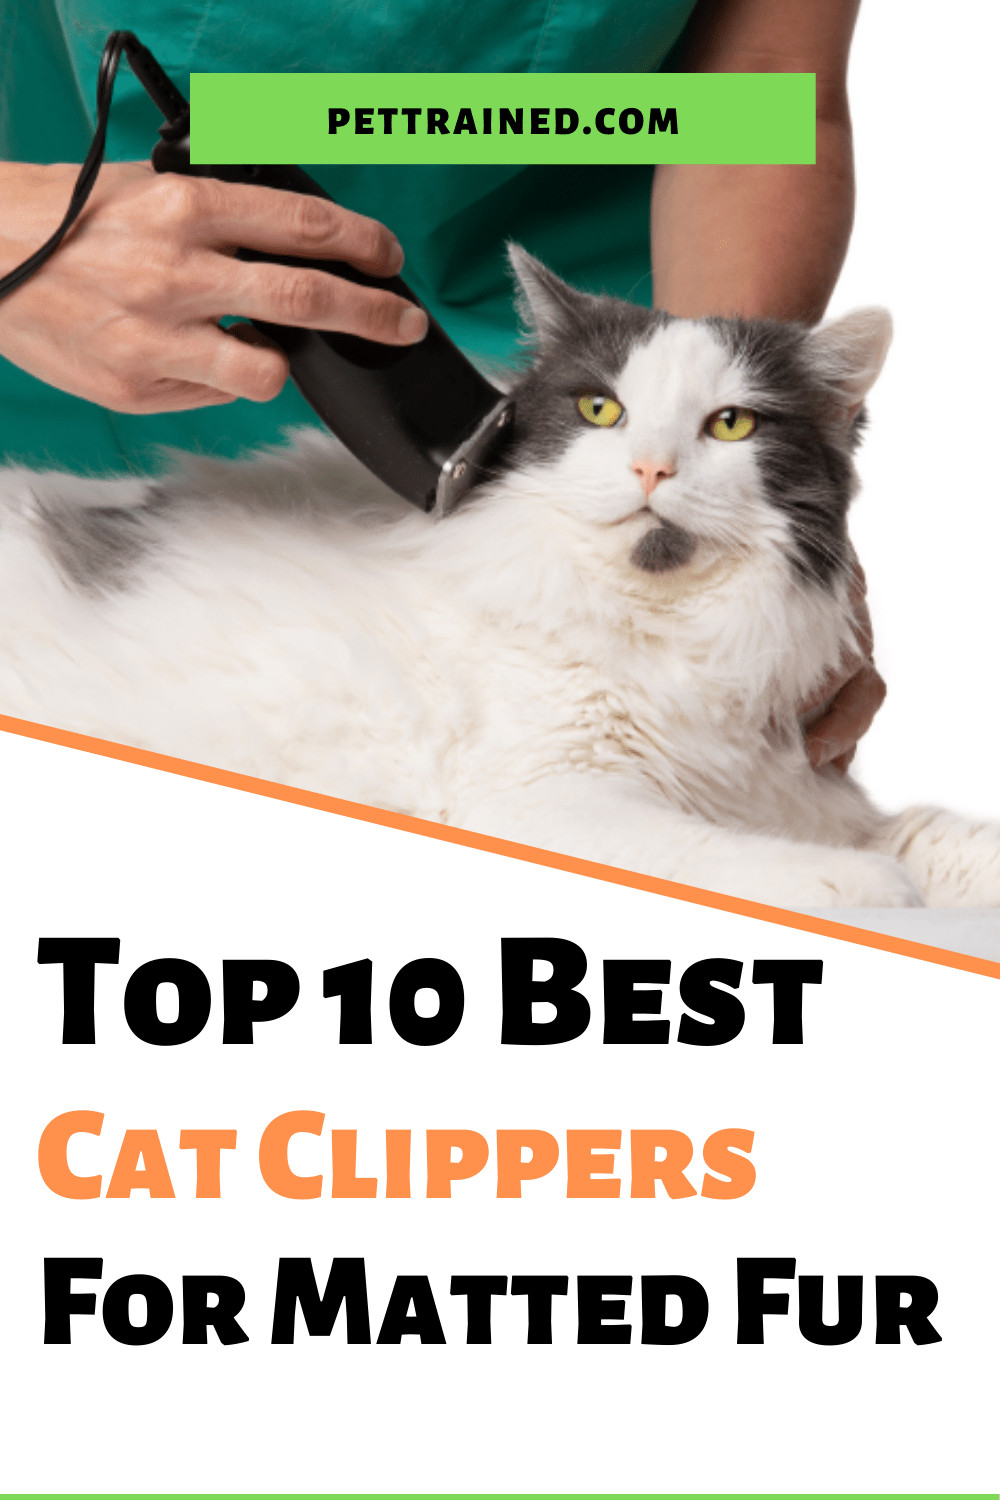 Top 10 Best Cat Clippers For Matted Fur